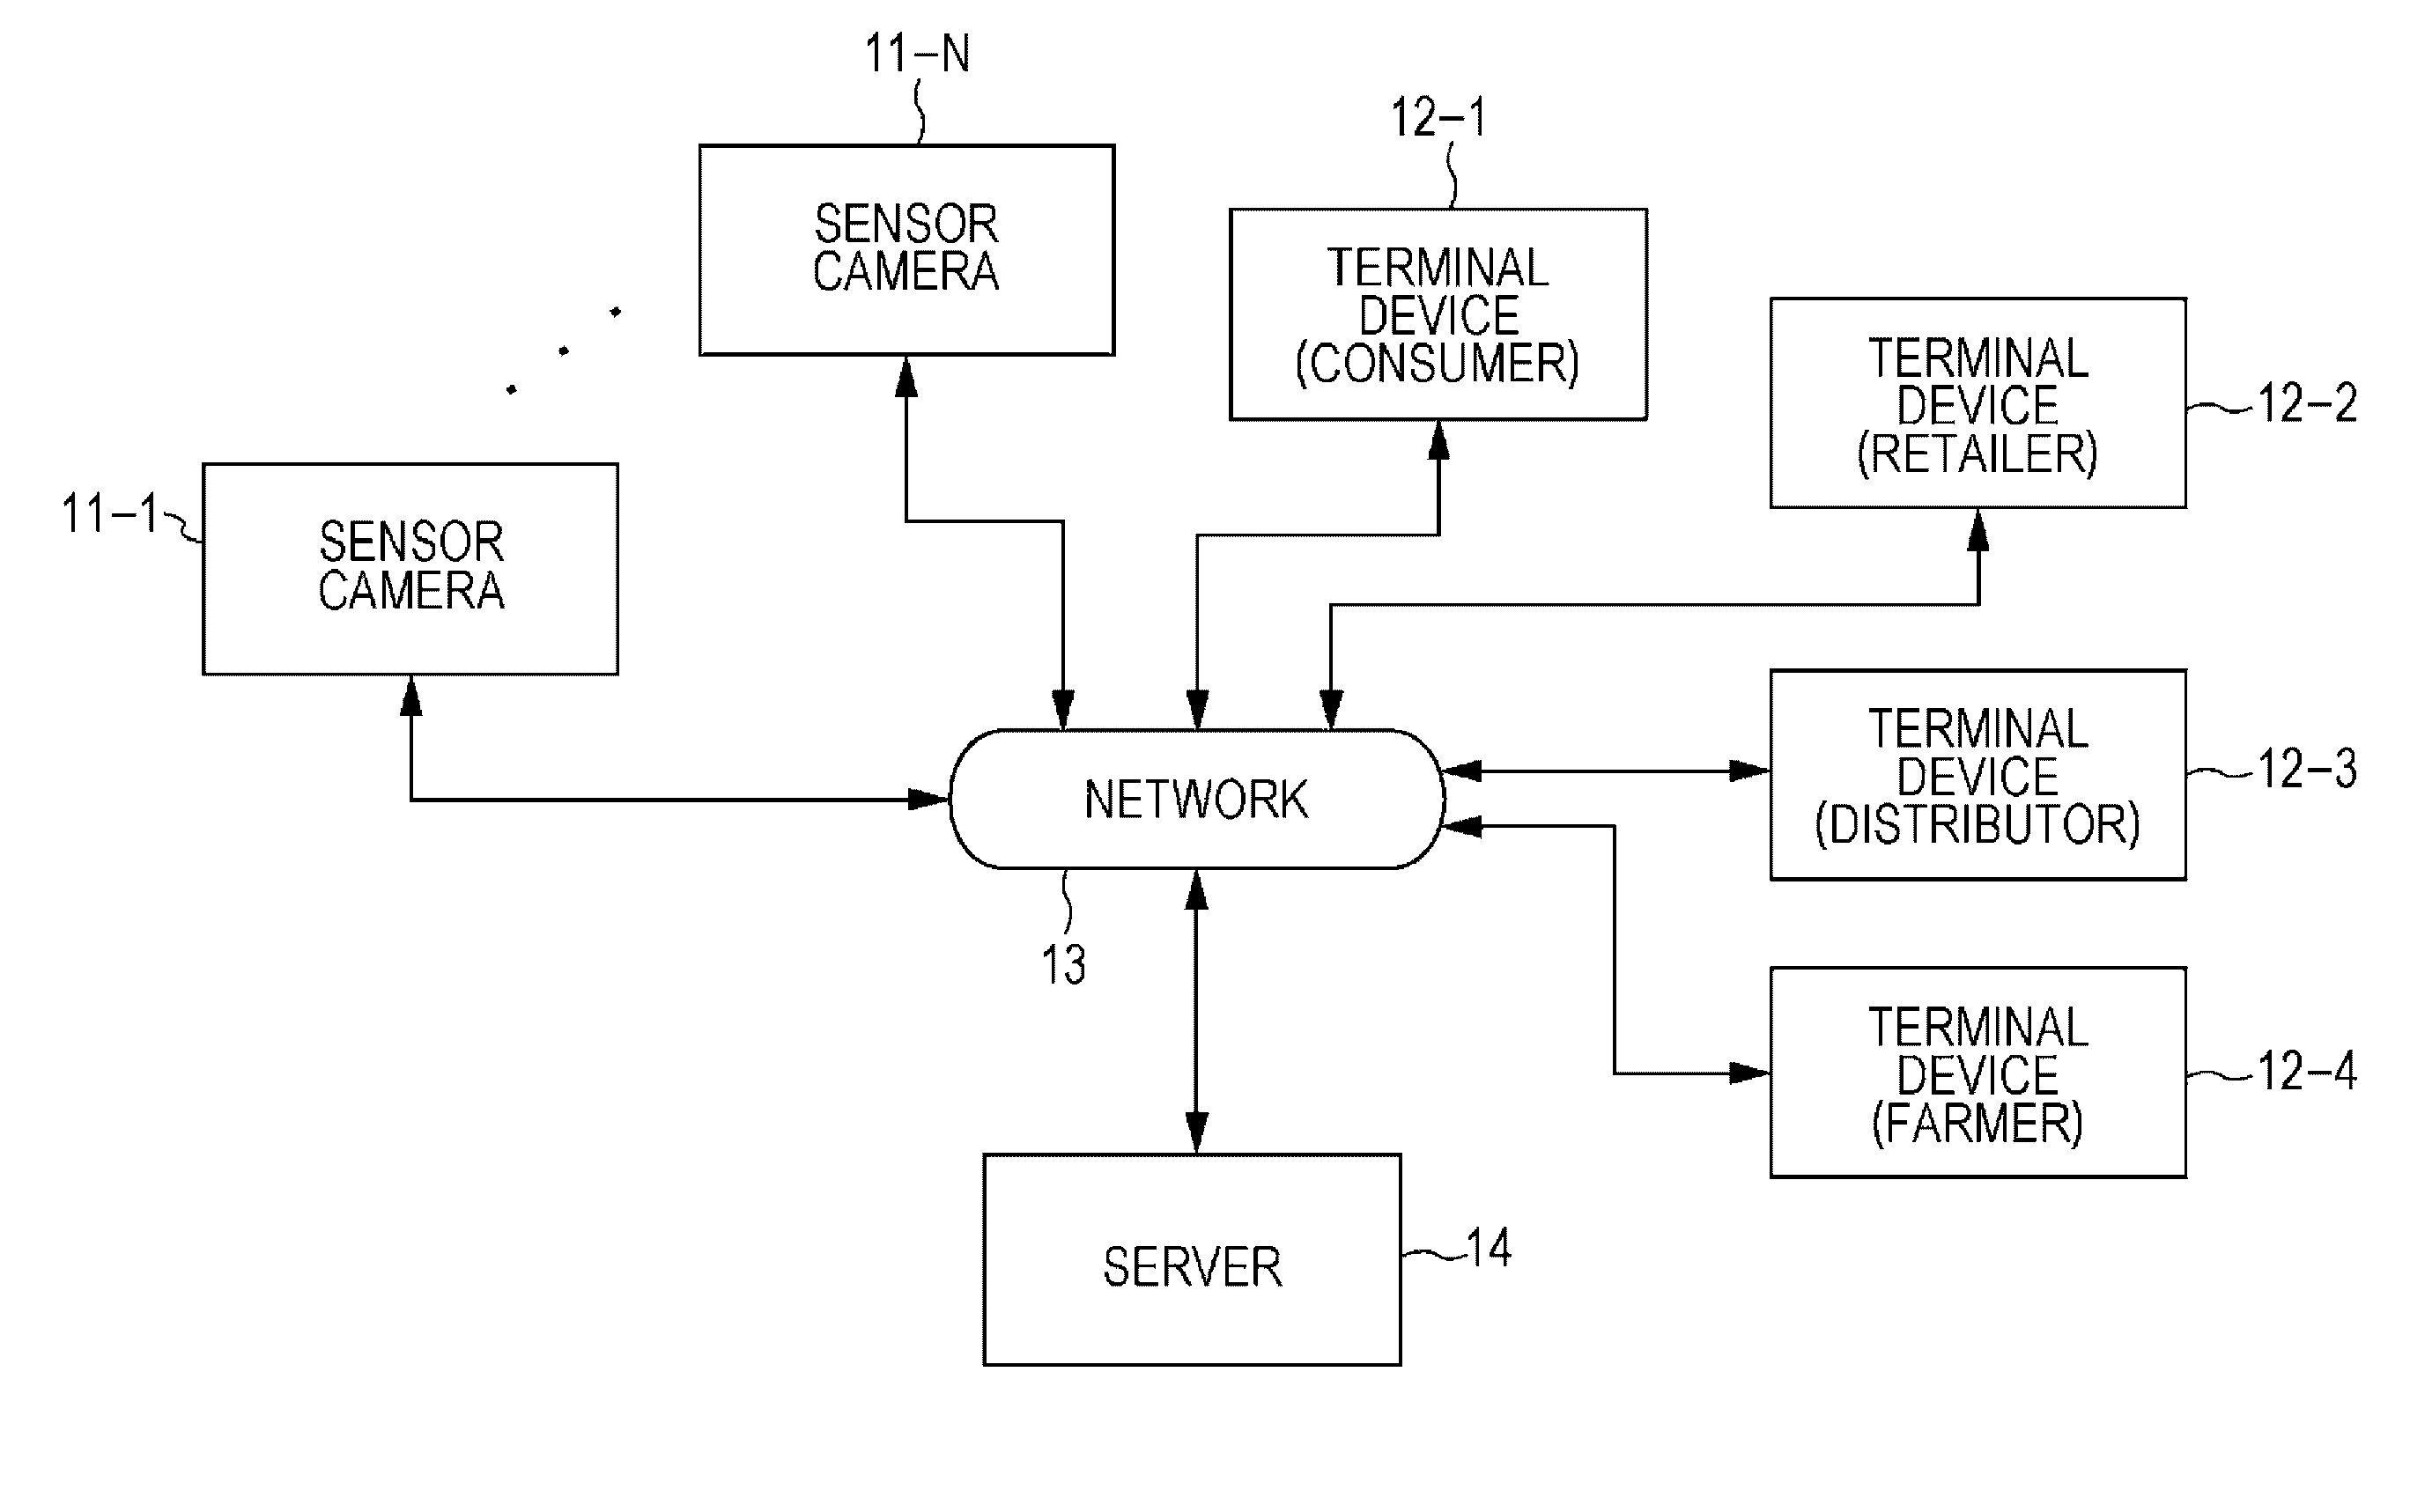 Method, system, and medium having stored thereon instructions that cause a processor to execute a method for obtaining image information of an organism comprising a set of optical data